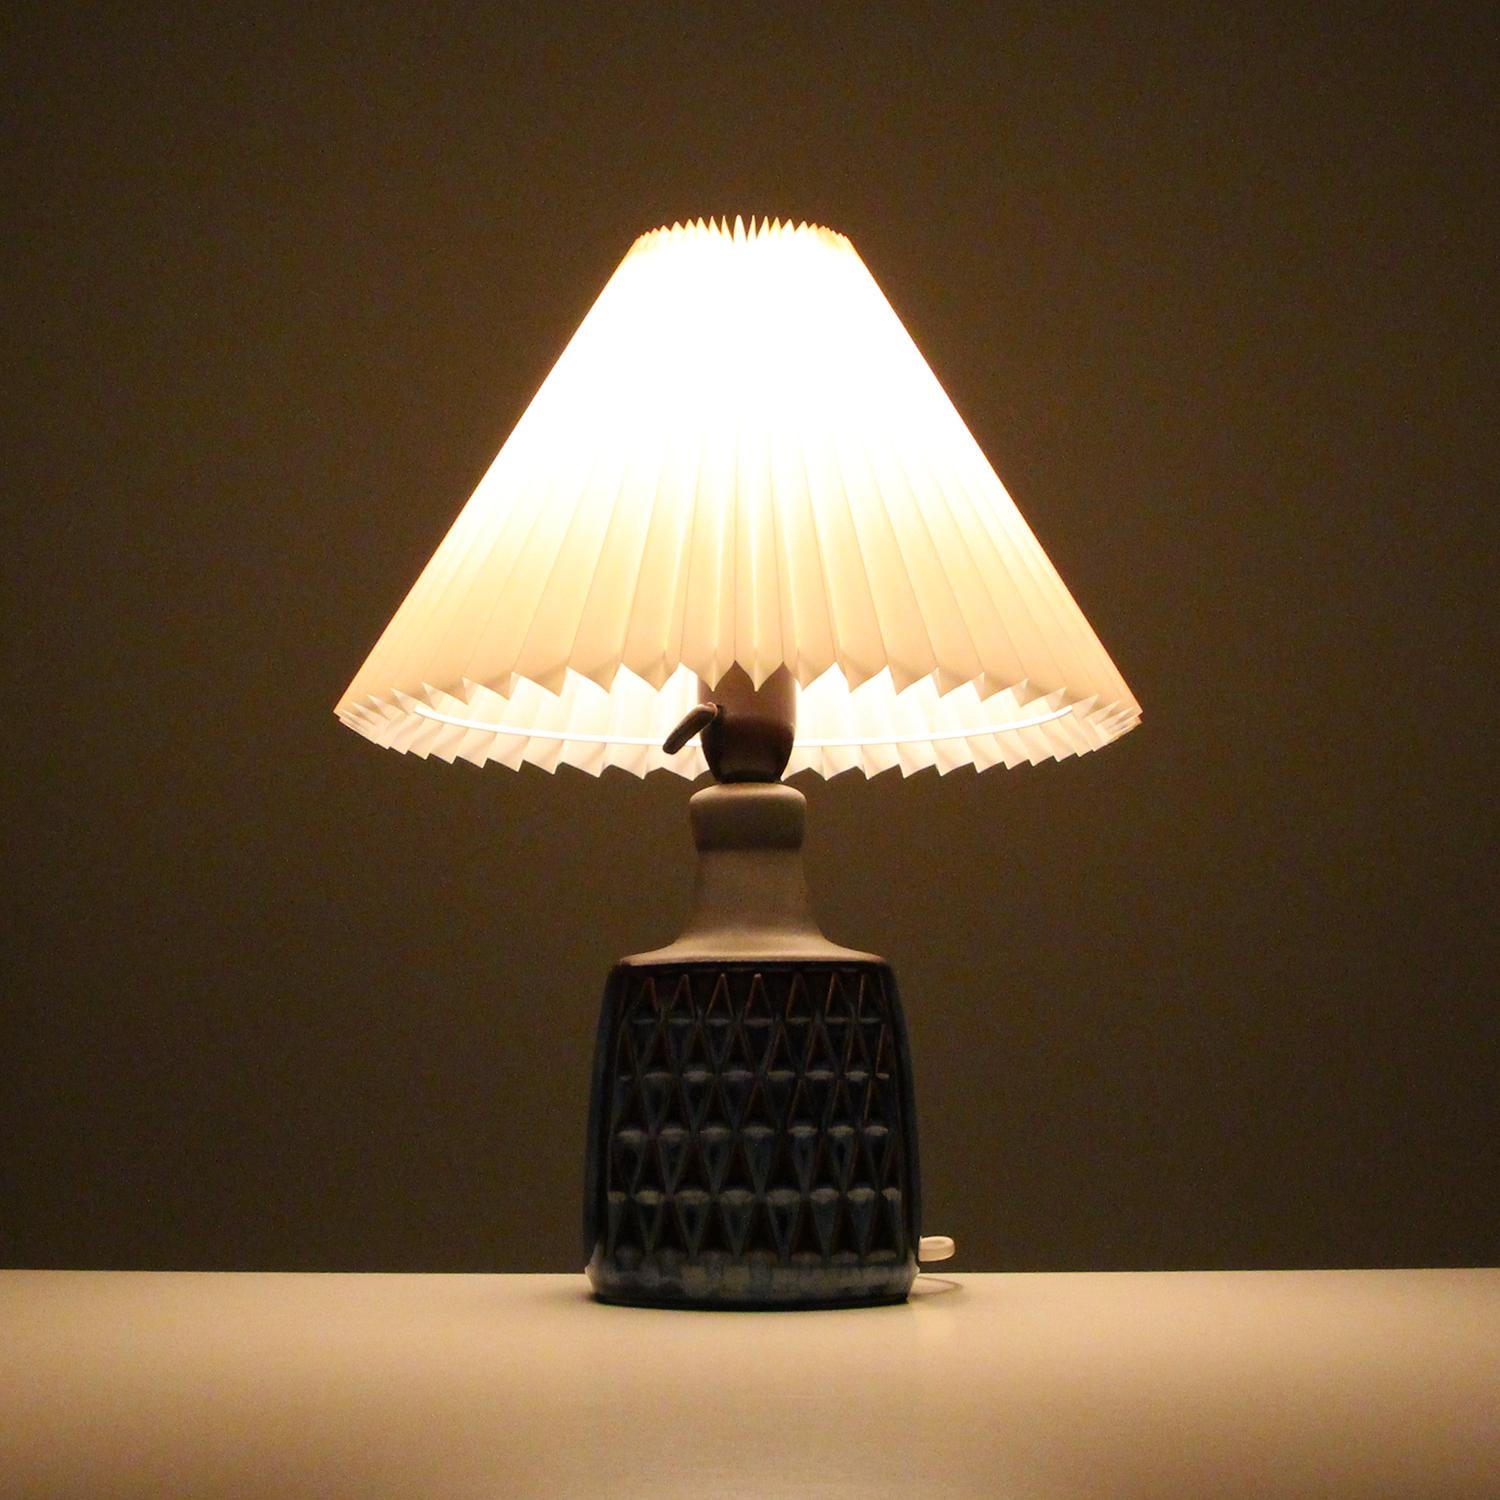 Danish Blue Table Lamp by Einar Johansen Soholm 1960s, with Vintage Shade Included